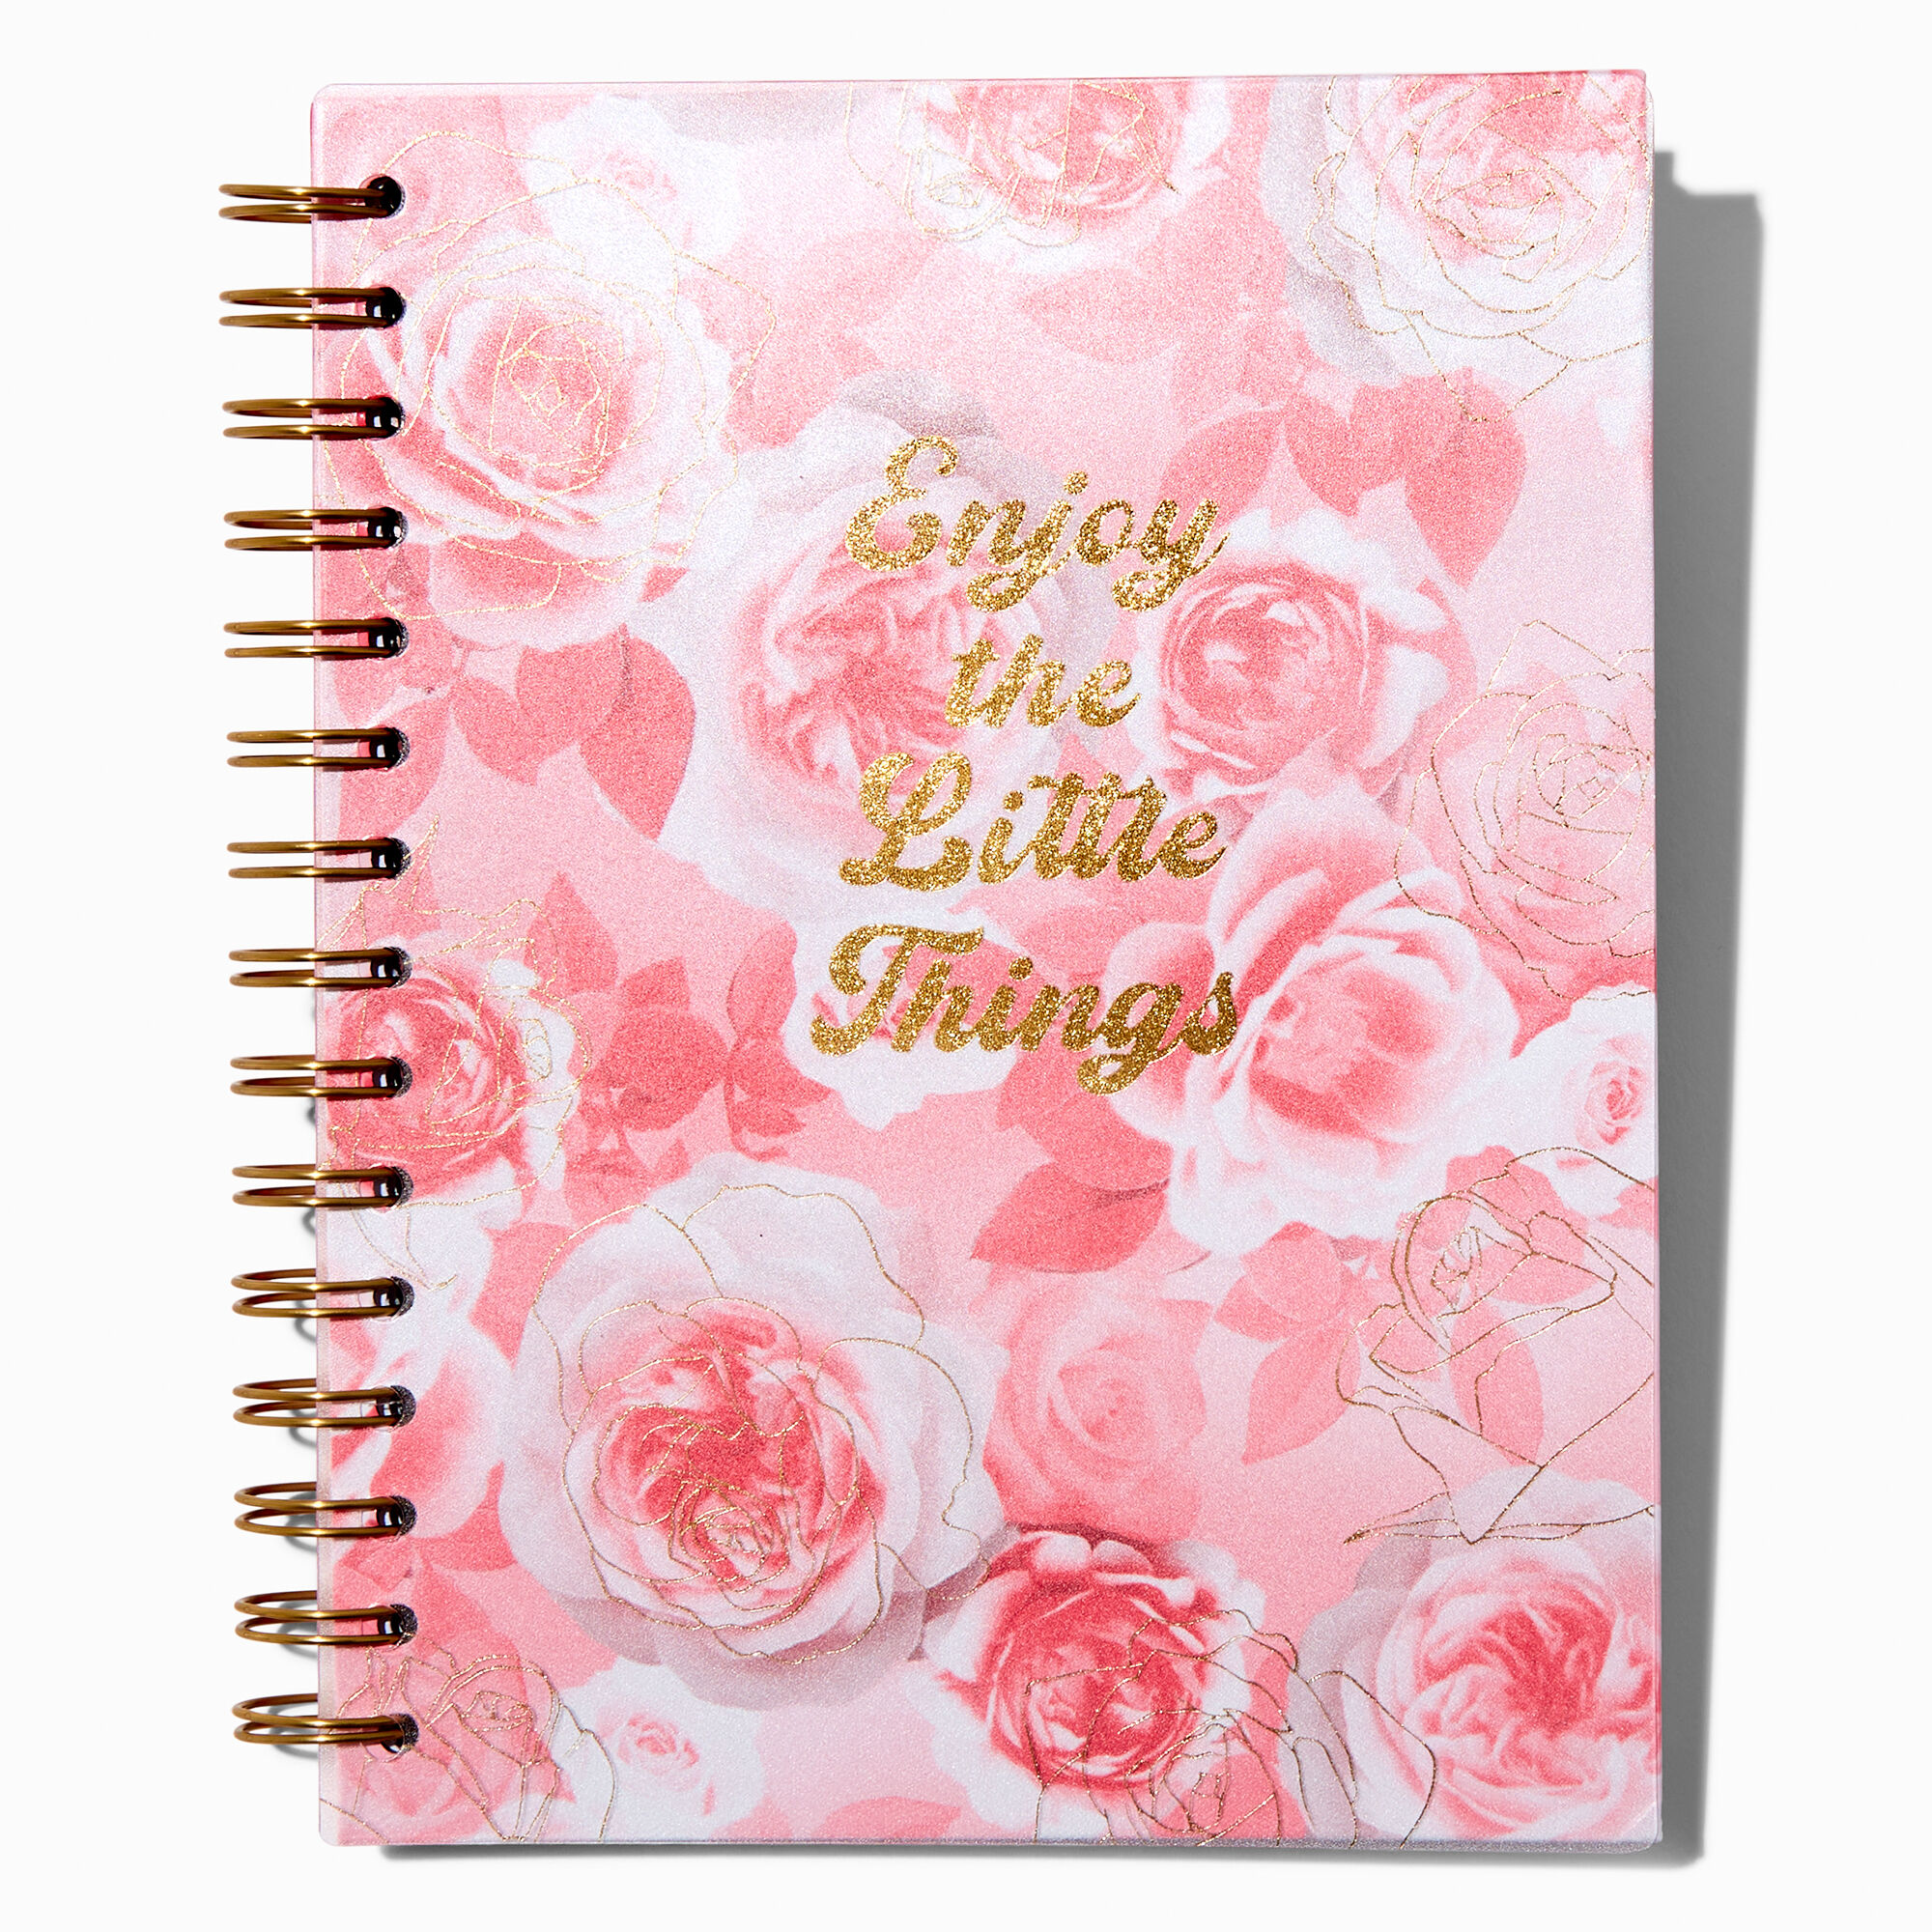 View Claires enjoy The Little Things Floral Spiral Notebook Pink information